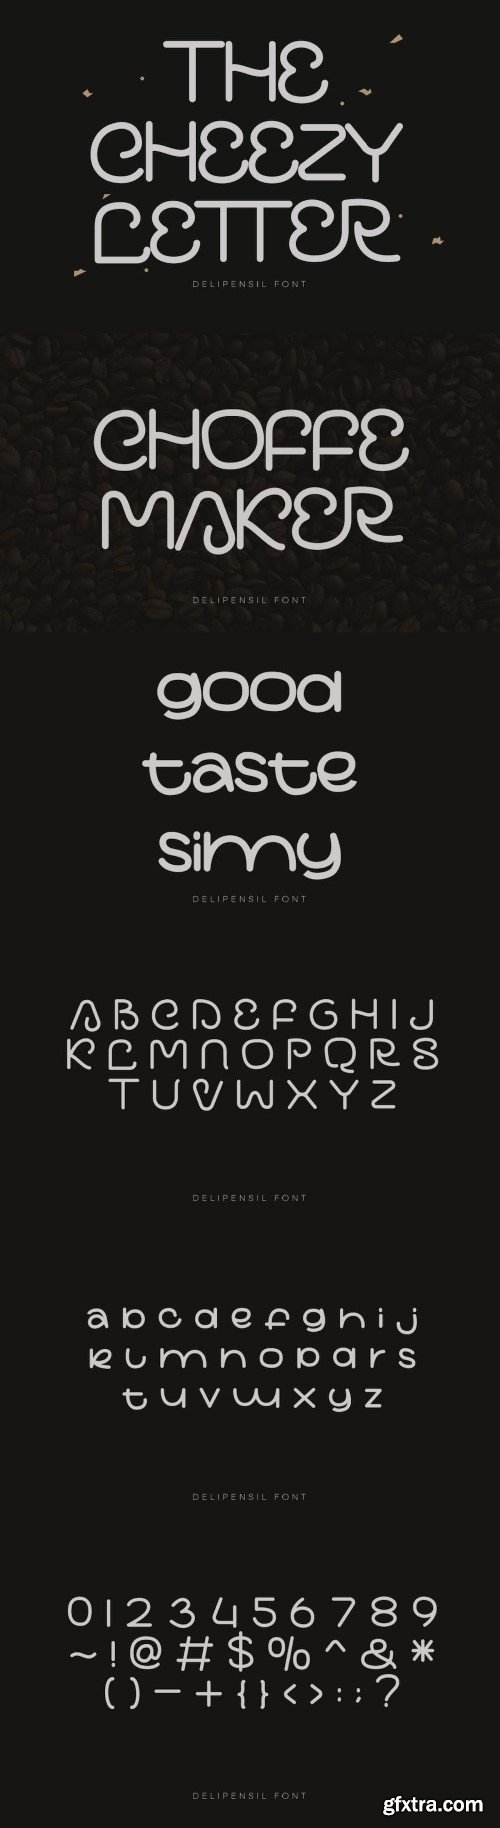 Cheezy - Rounded Modern Typeface